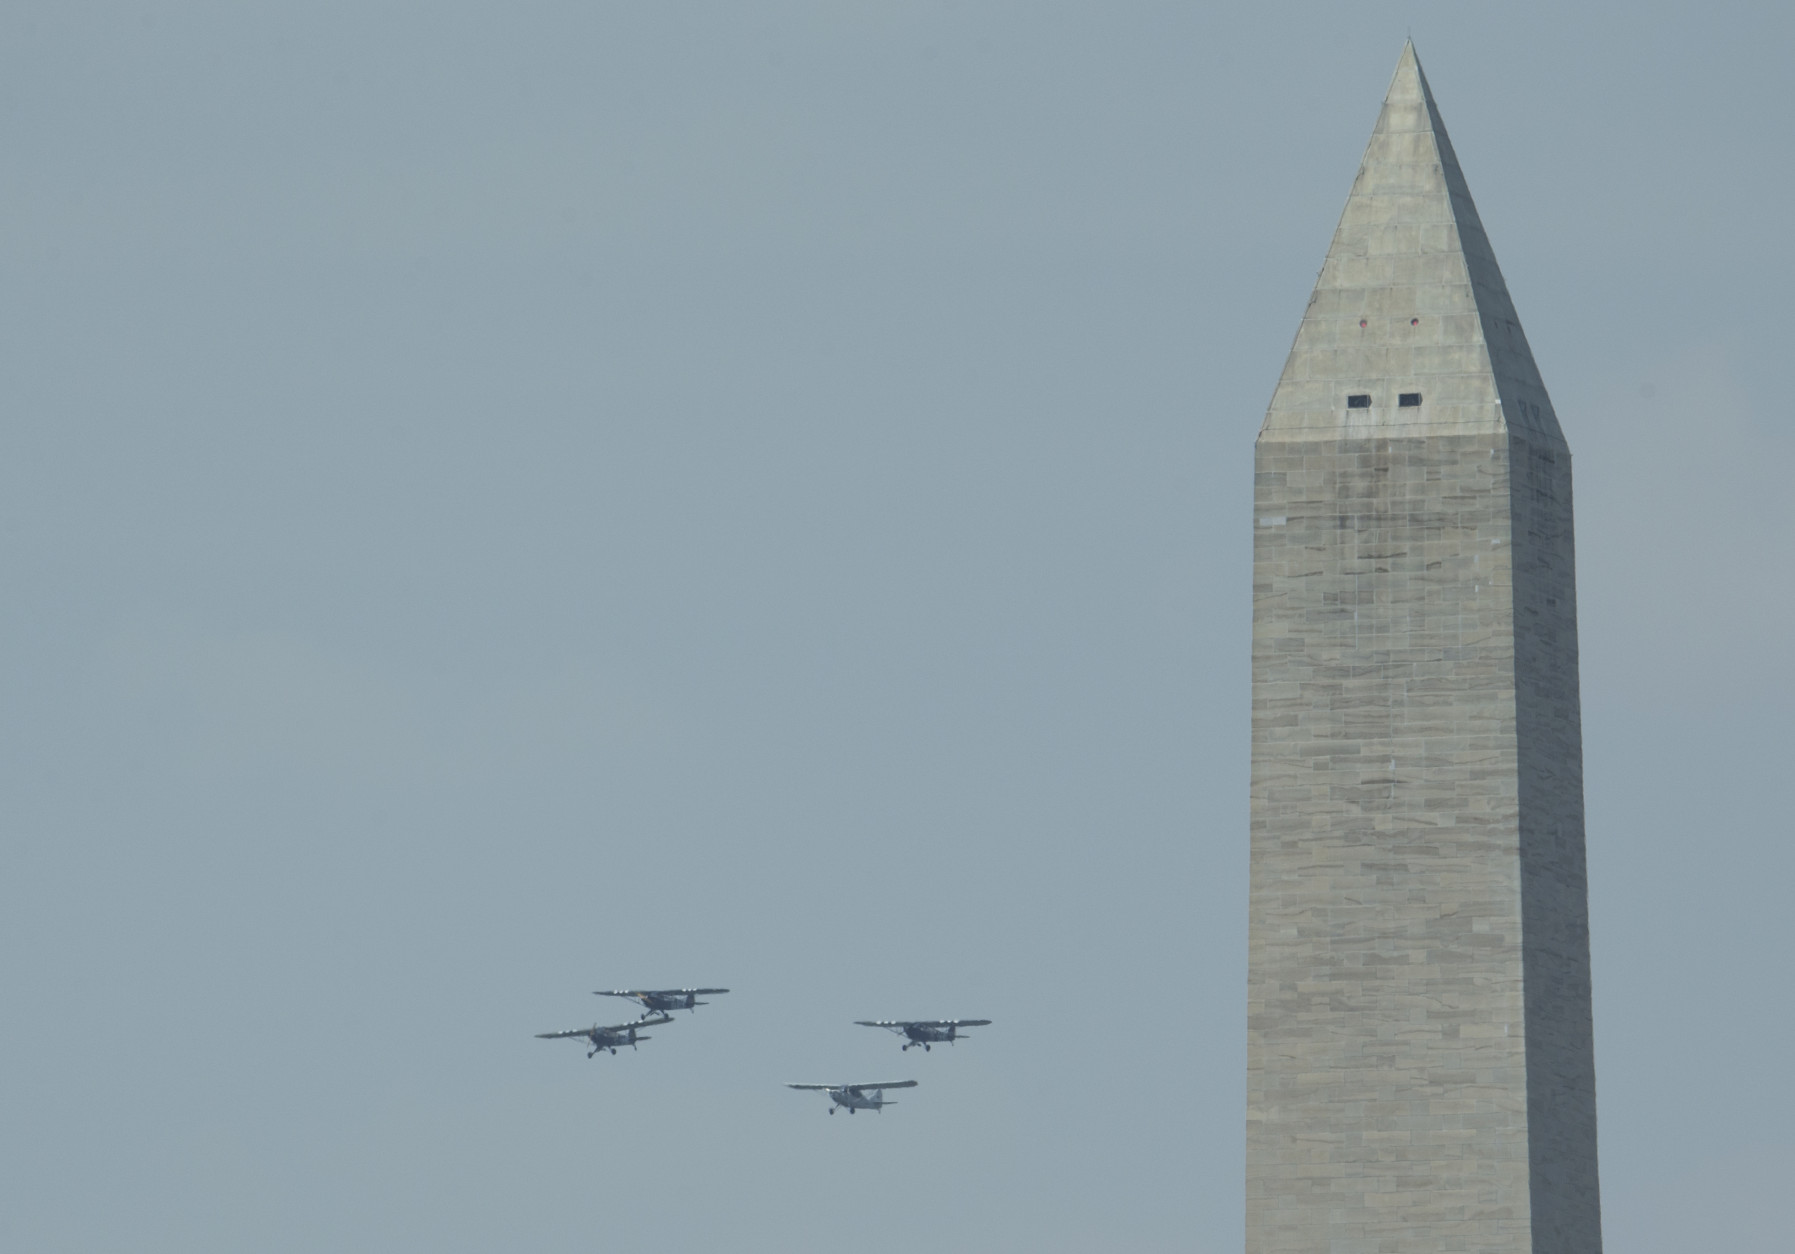 World War II vintage aircrafts during a flyover over Washington, Friday, May 8, 2015, marking the 70th anniversary of the end of the war in Europe on May 8, 1945, and commemorate the Allied victory in Europe during World War II. (AP Photo/Manuel Balce Ceneta)